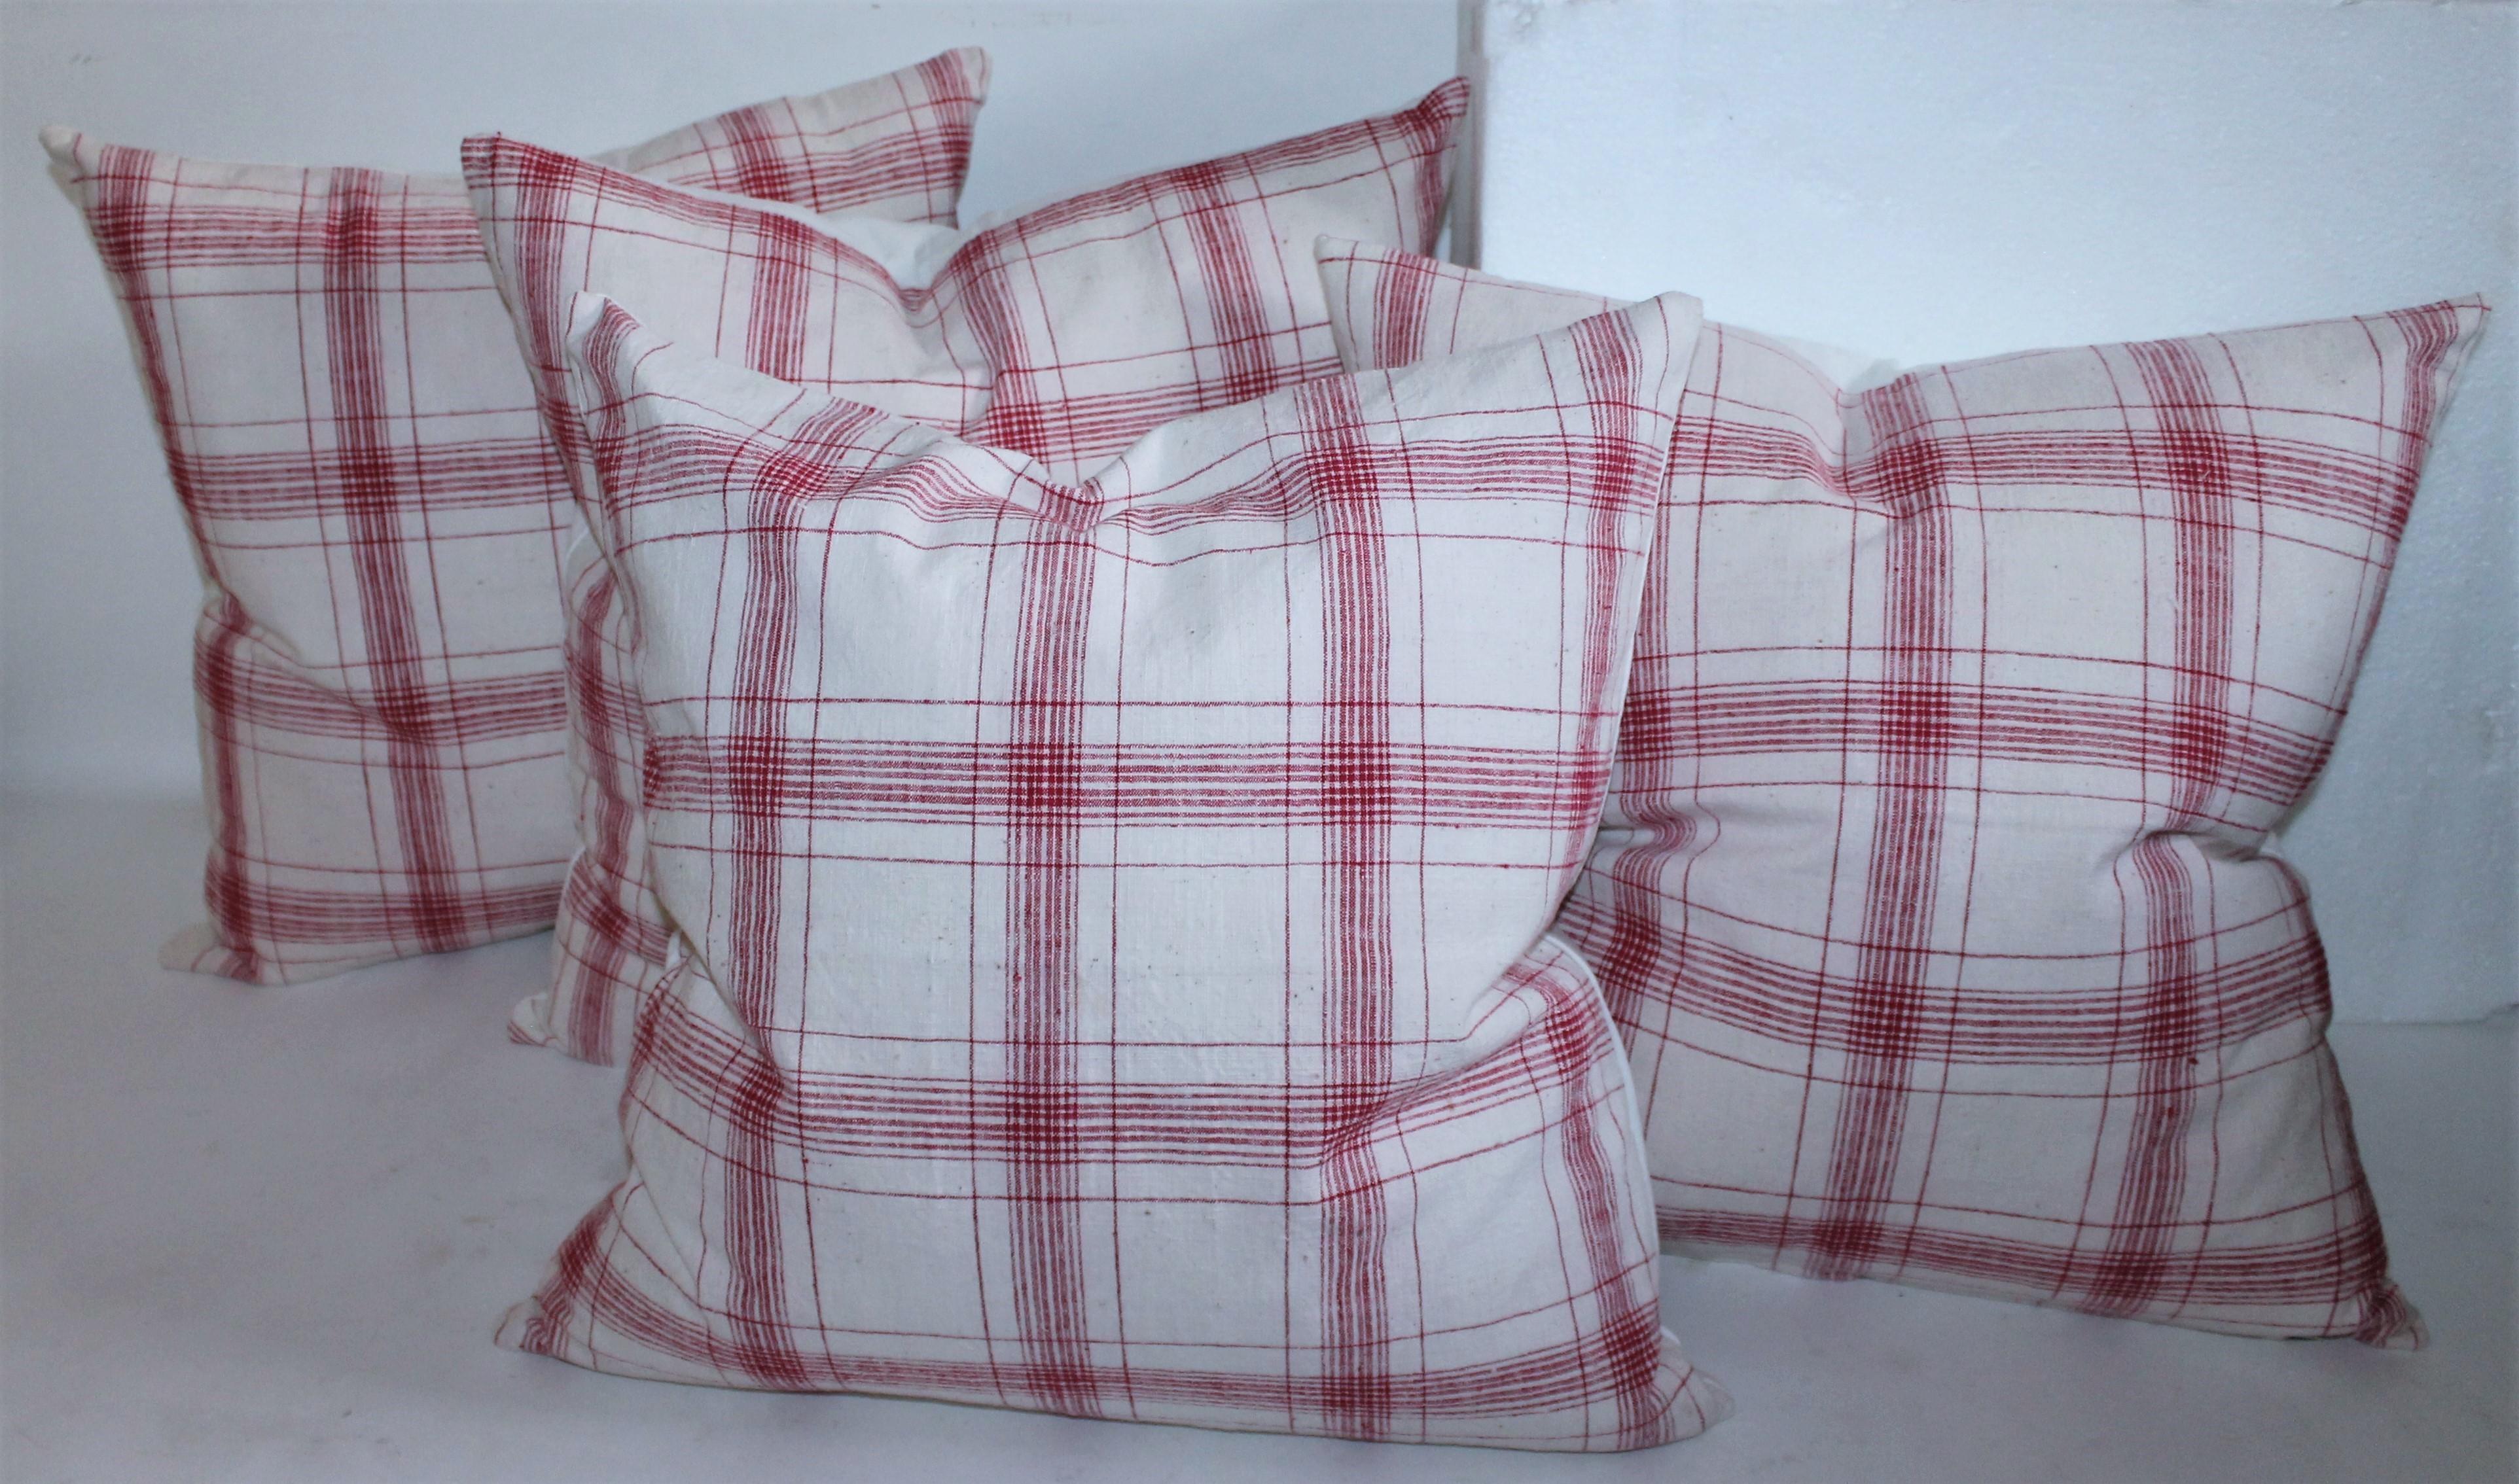 19th century red and white striped home spun linen pillows. Great condition with down and feather inserts. Sold as in a set of Four.